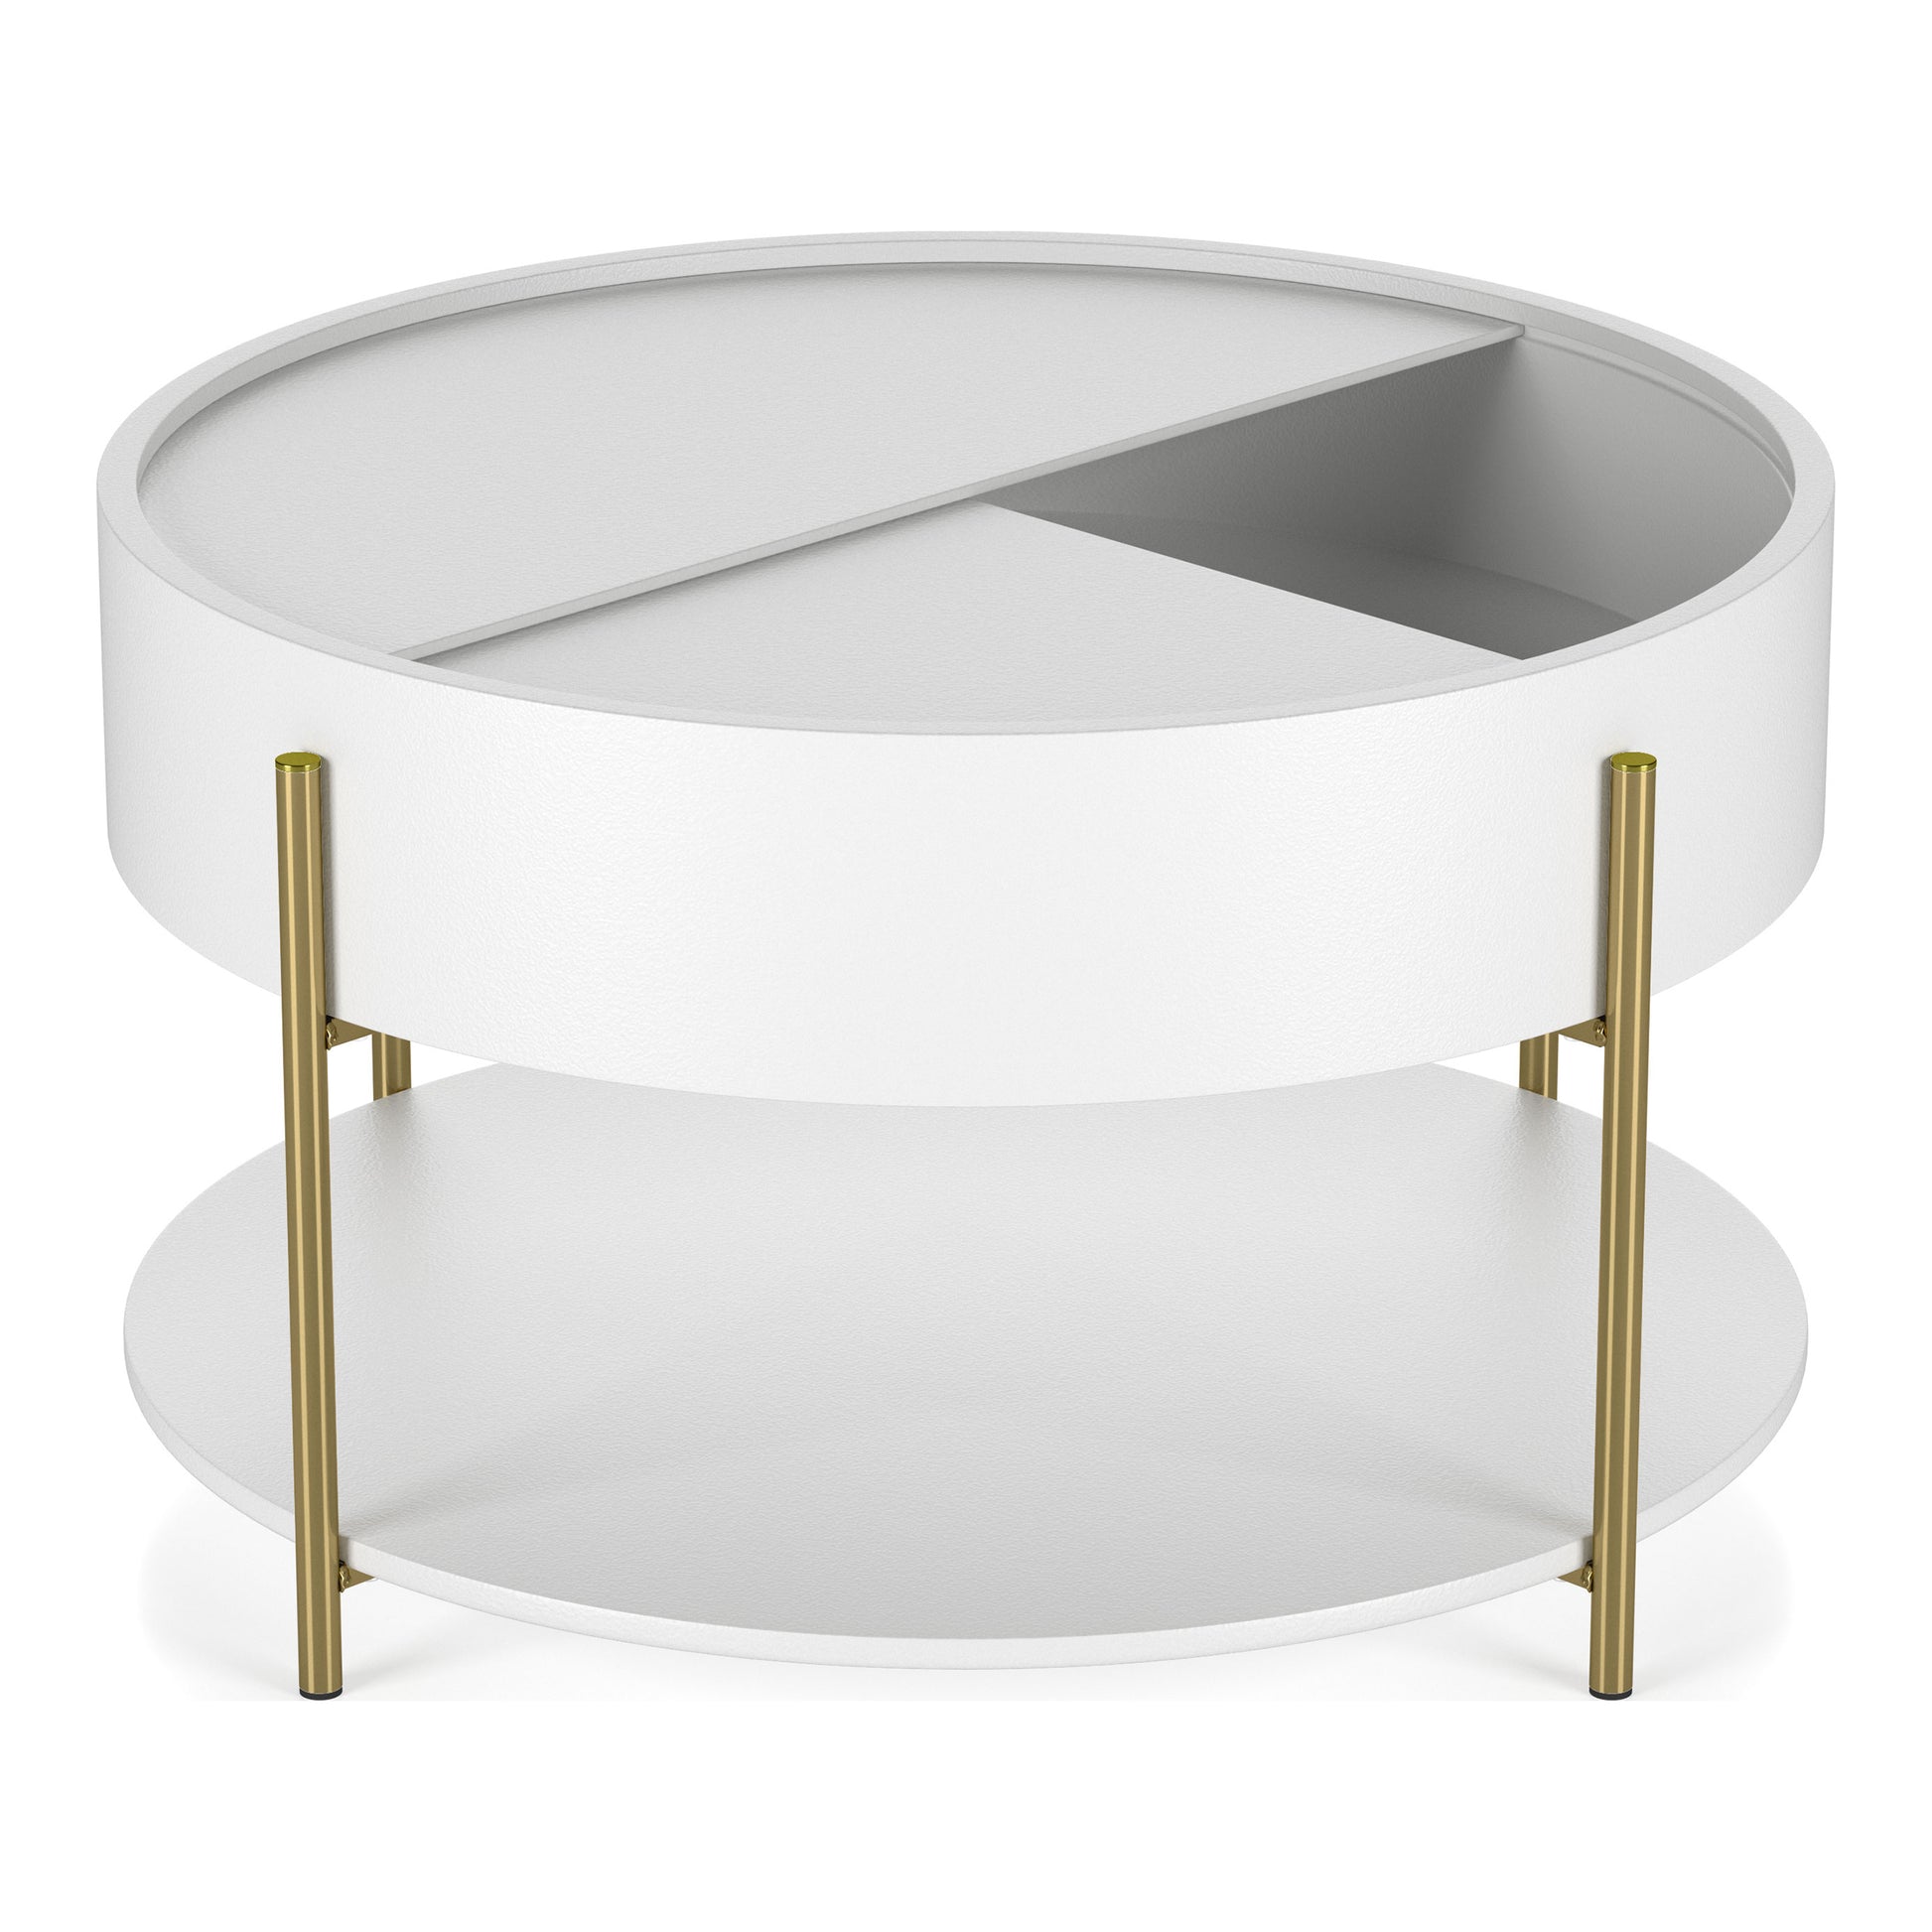 Front-facing modern white and gold round storage coffee table with top partially open on a white background